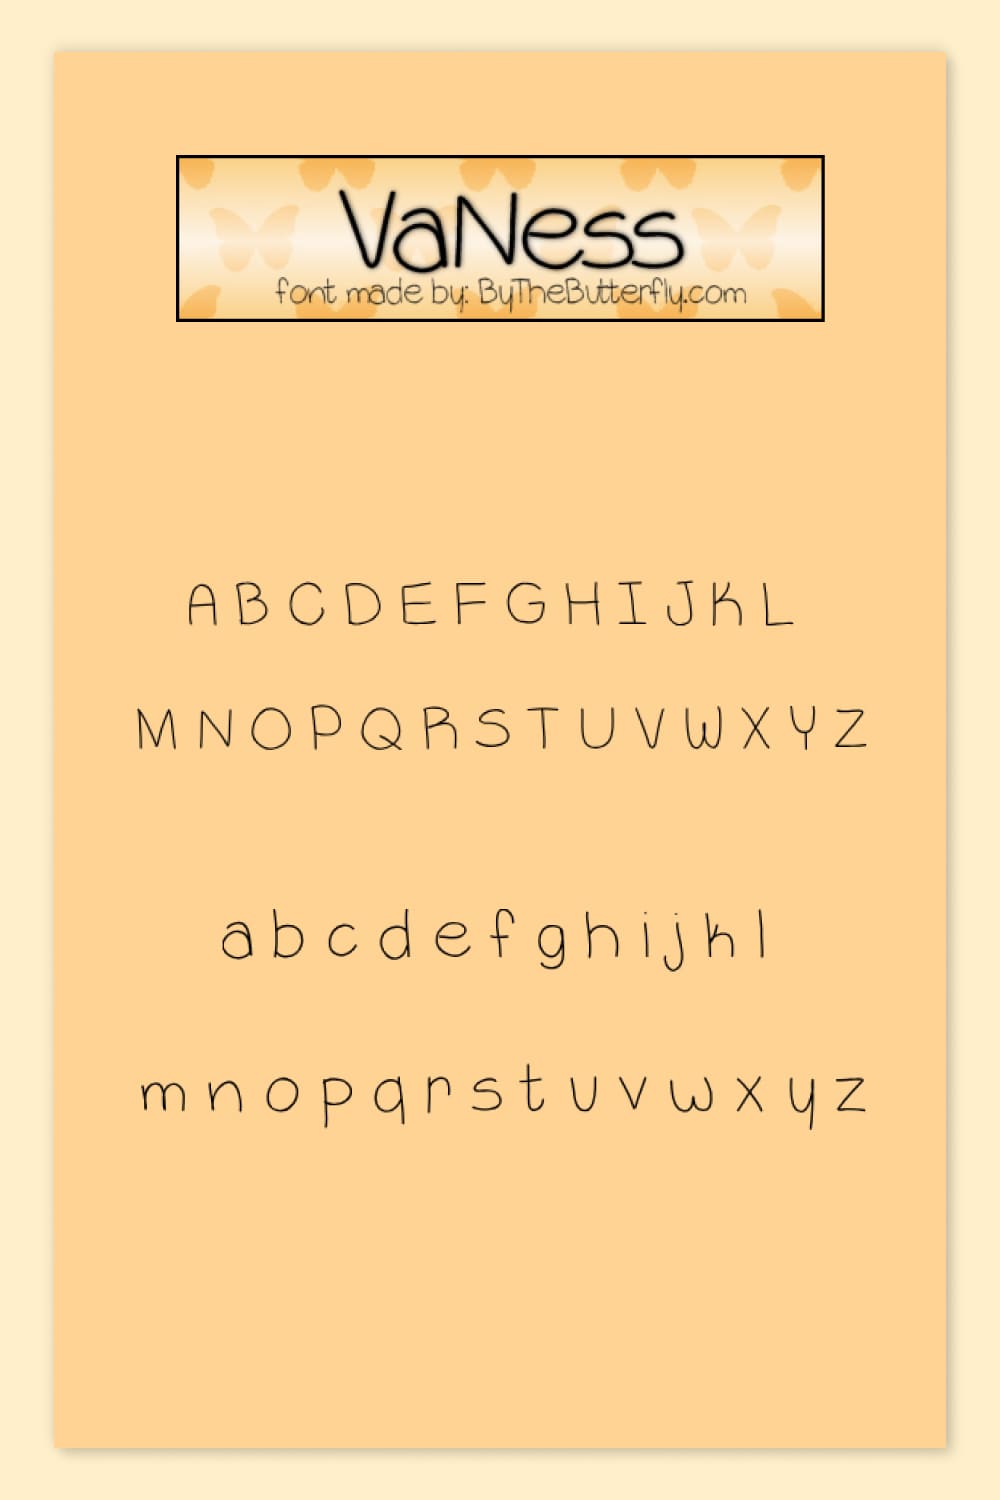 -An example of a Vaness font on a yellow background.